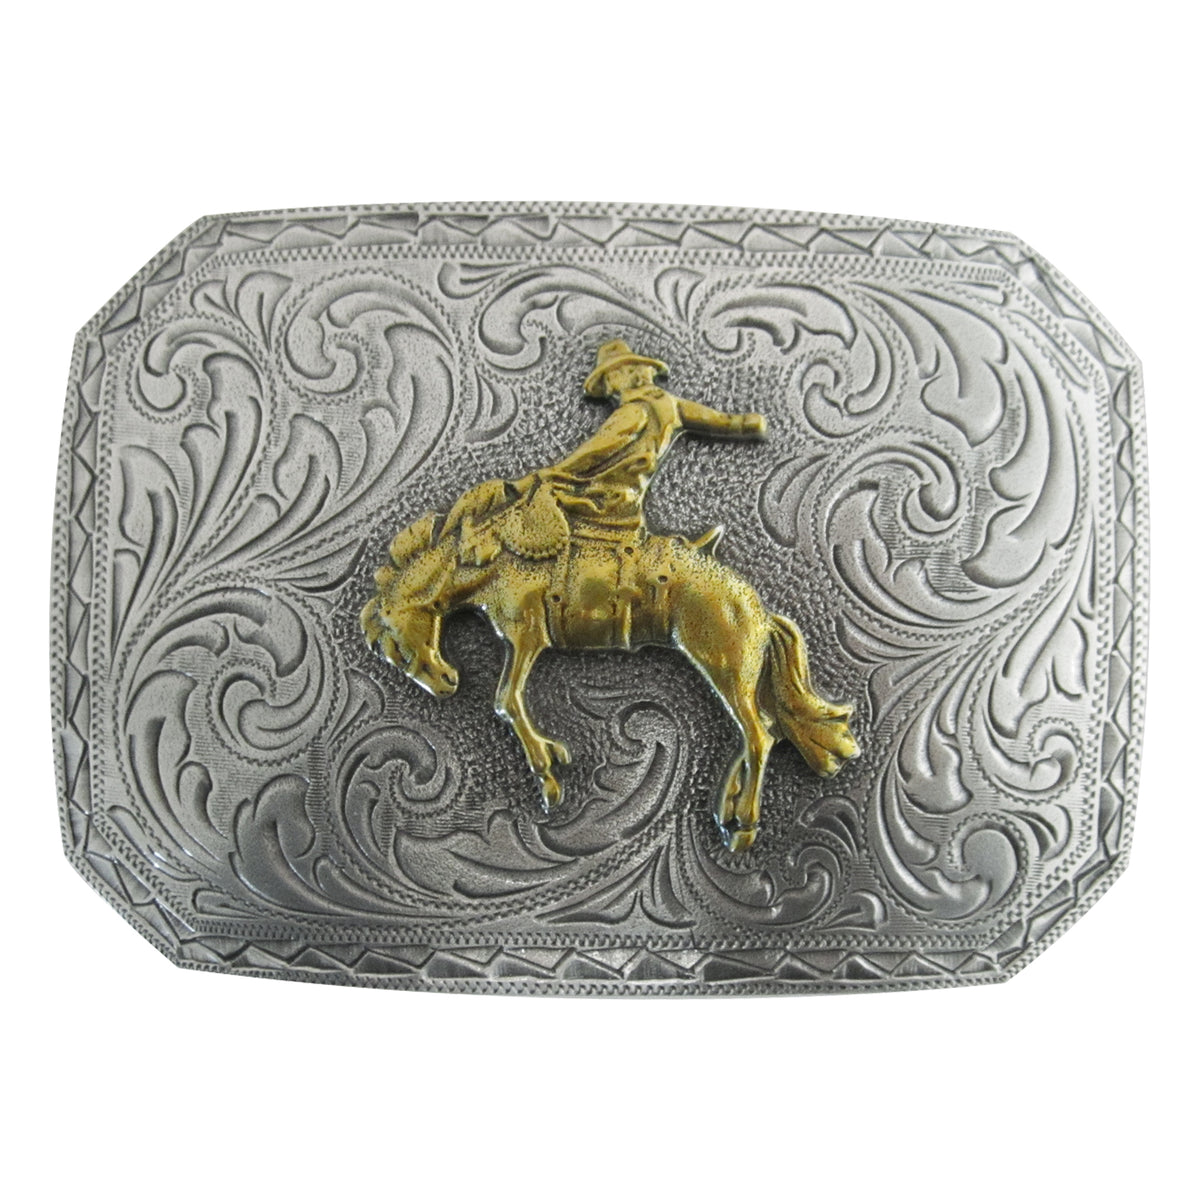 Etched Bronc Rider Buckle